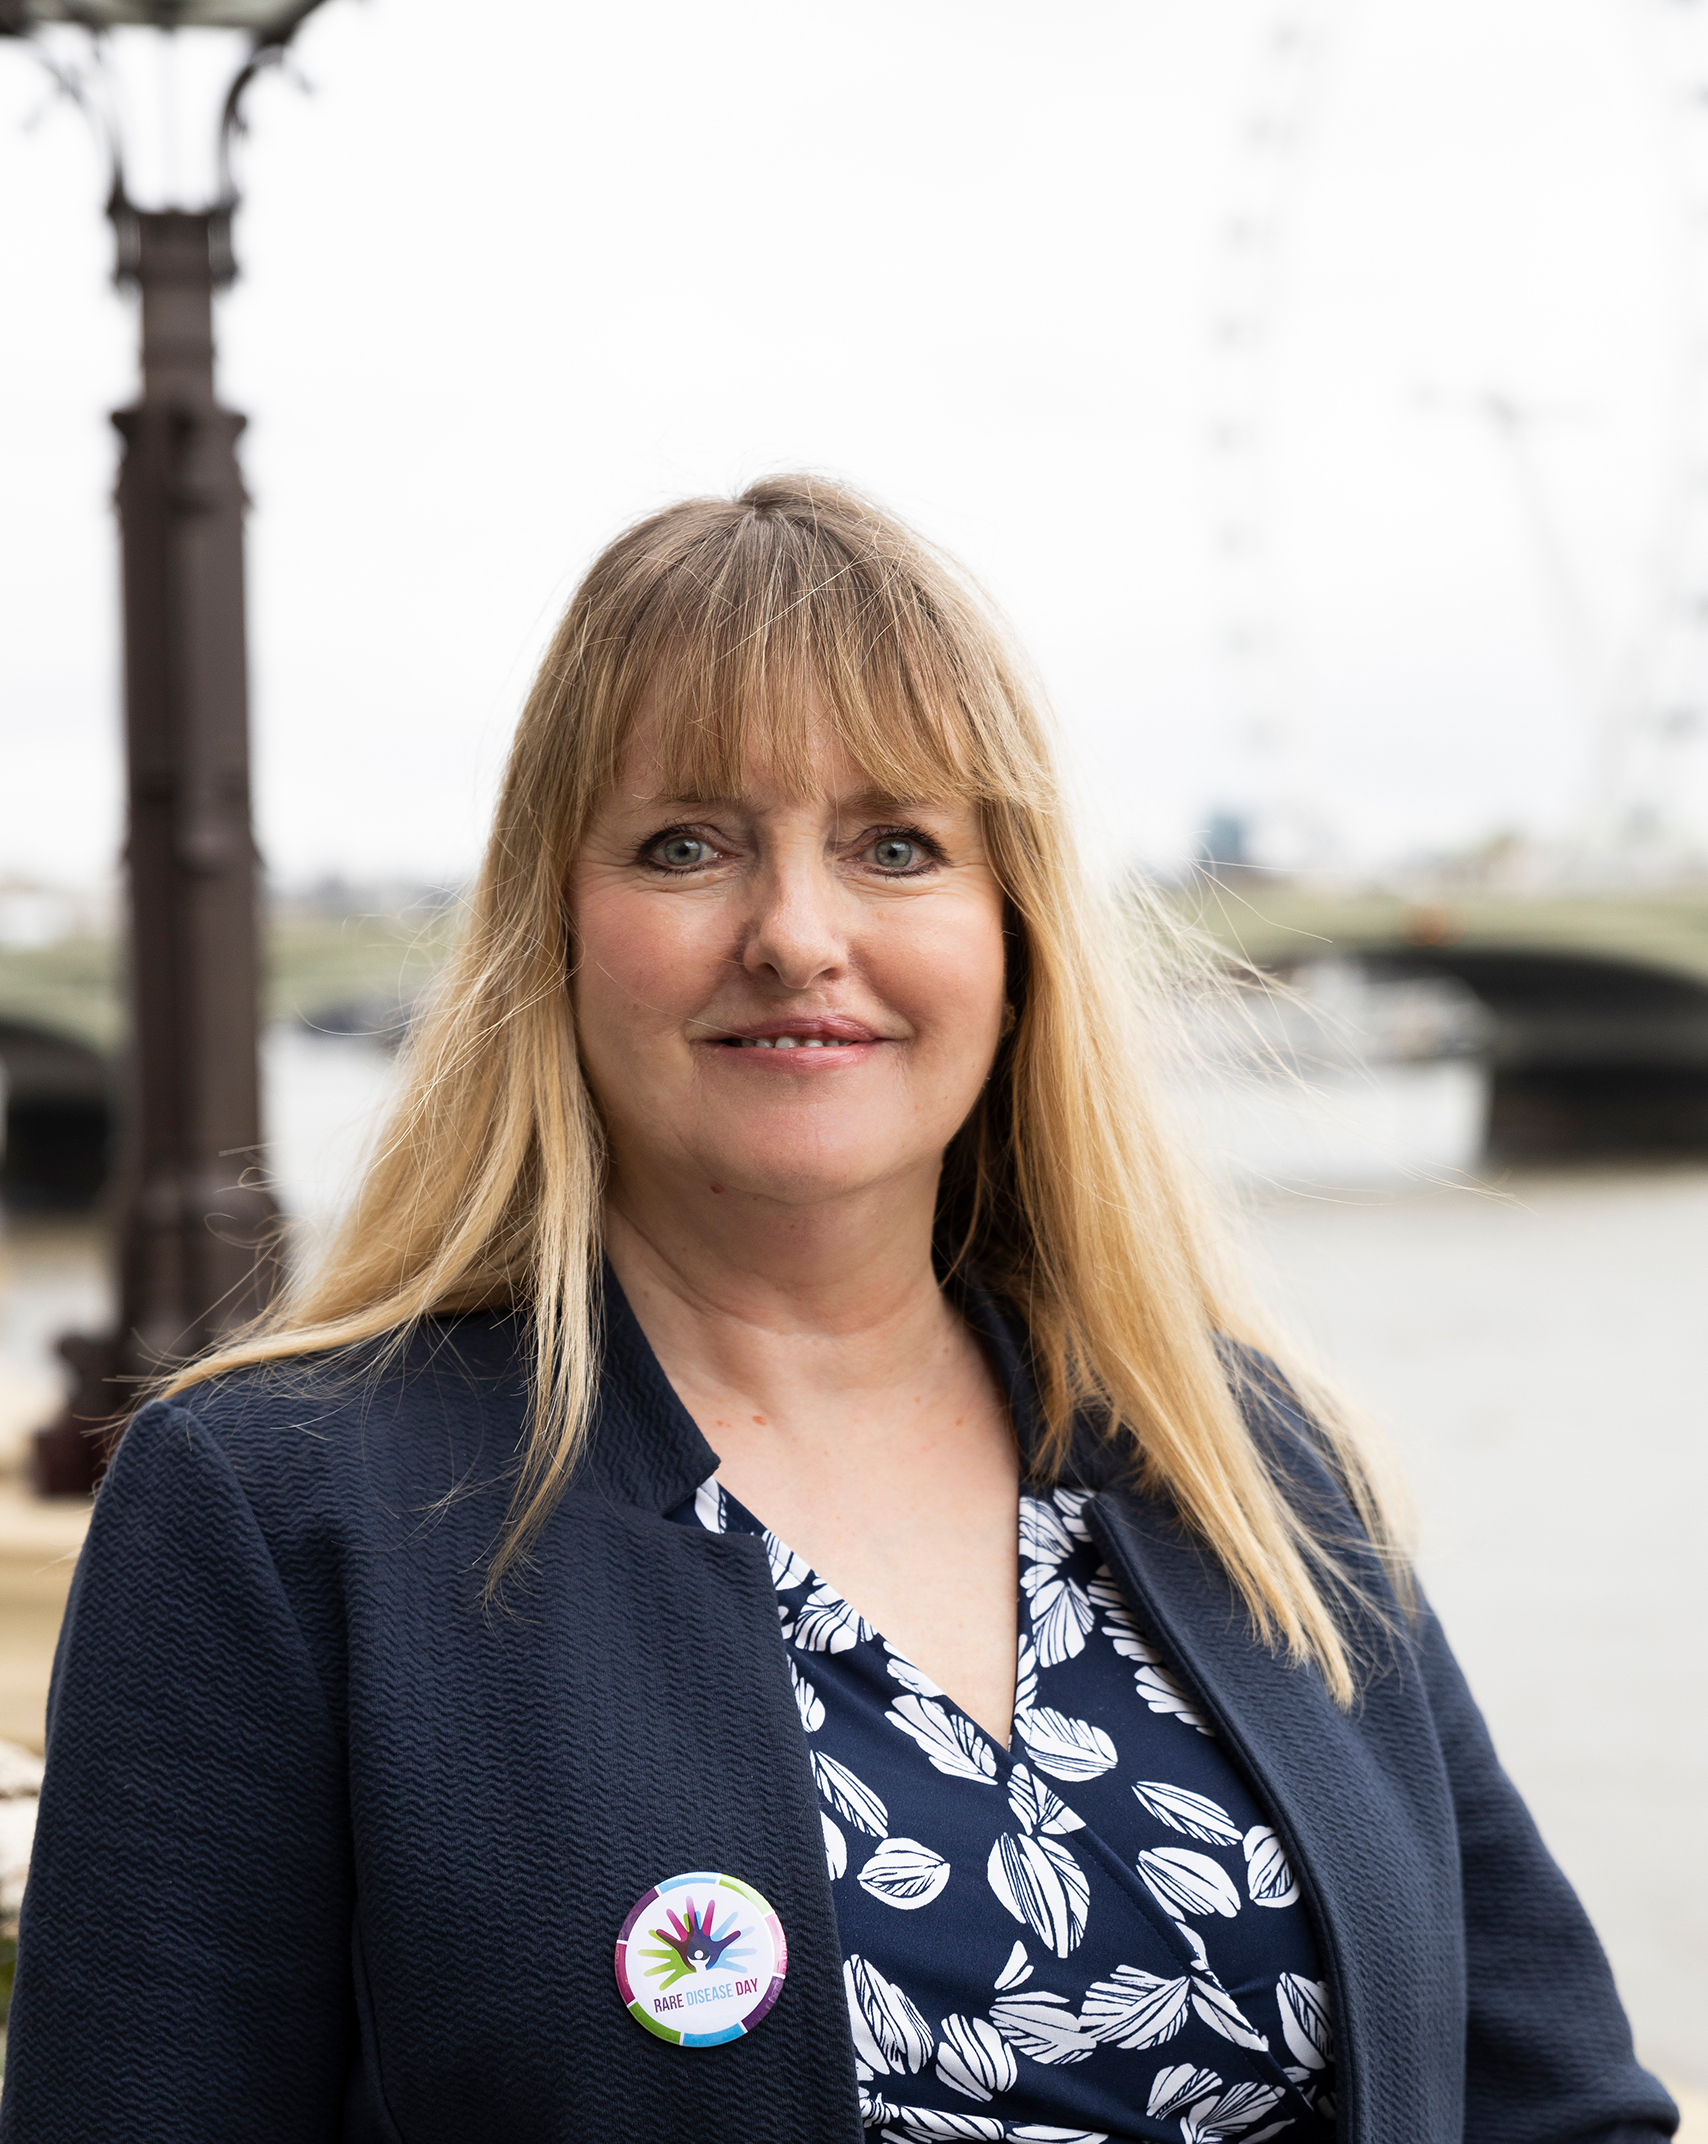 A headshot of Mary, Genetic Alliance UK's HR team. She has long blonde hair and wears a dark suit jacket and floral shirt. She stands by the Thames river at the Westminster Parliament building.